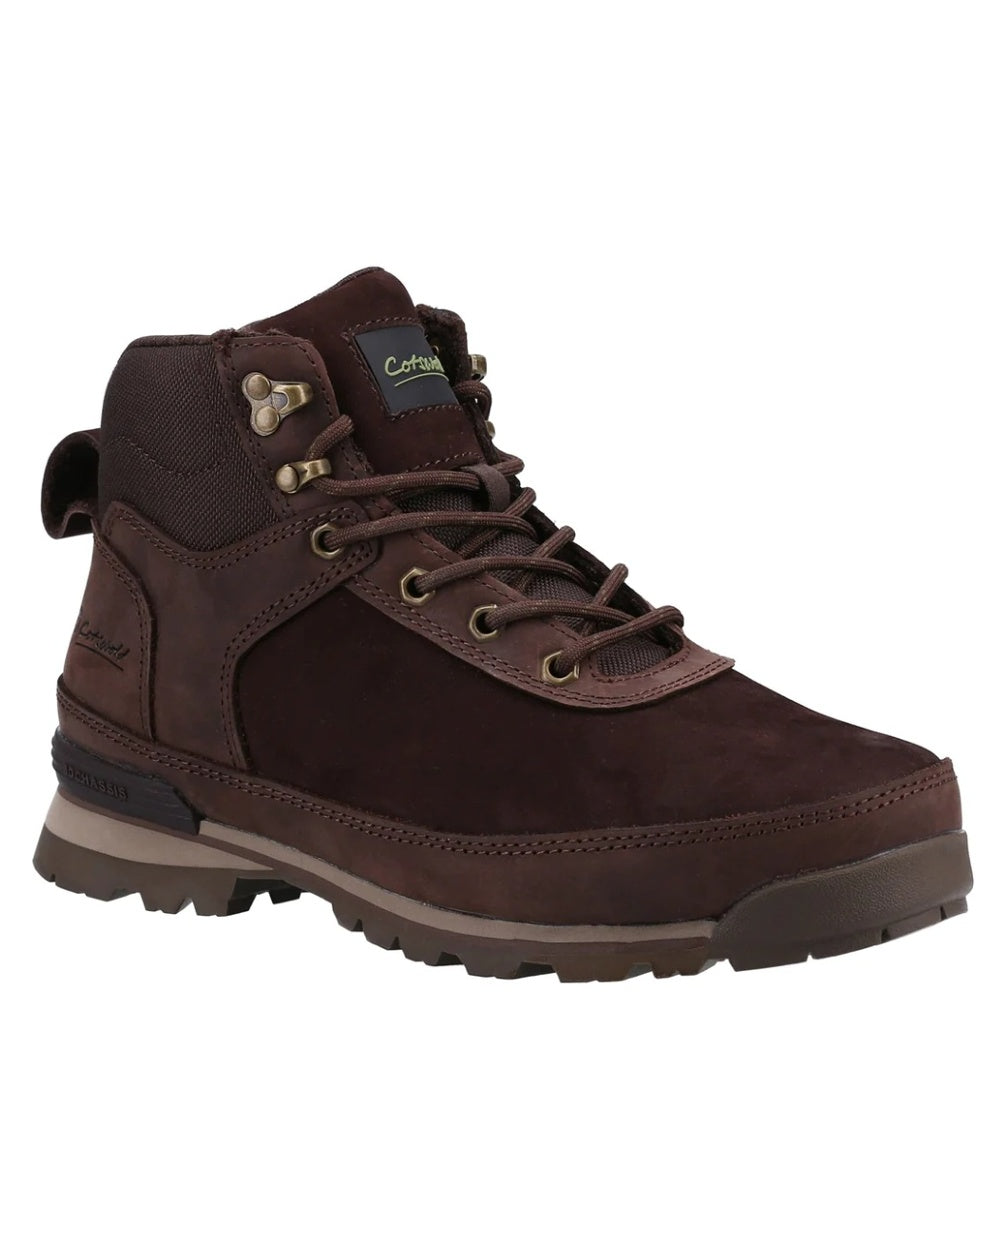 Brown coloured Cotswold Mens Yanworth Hiking Boots on white background 